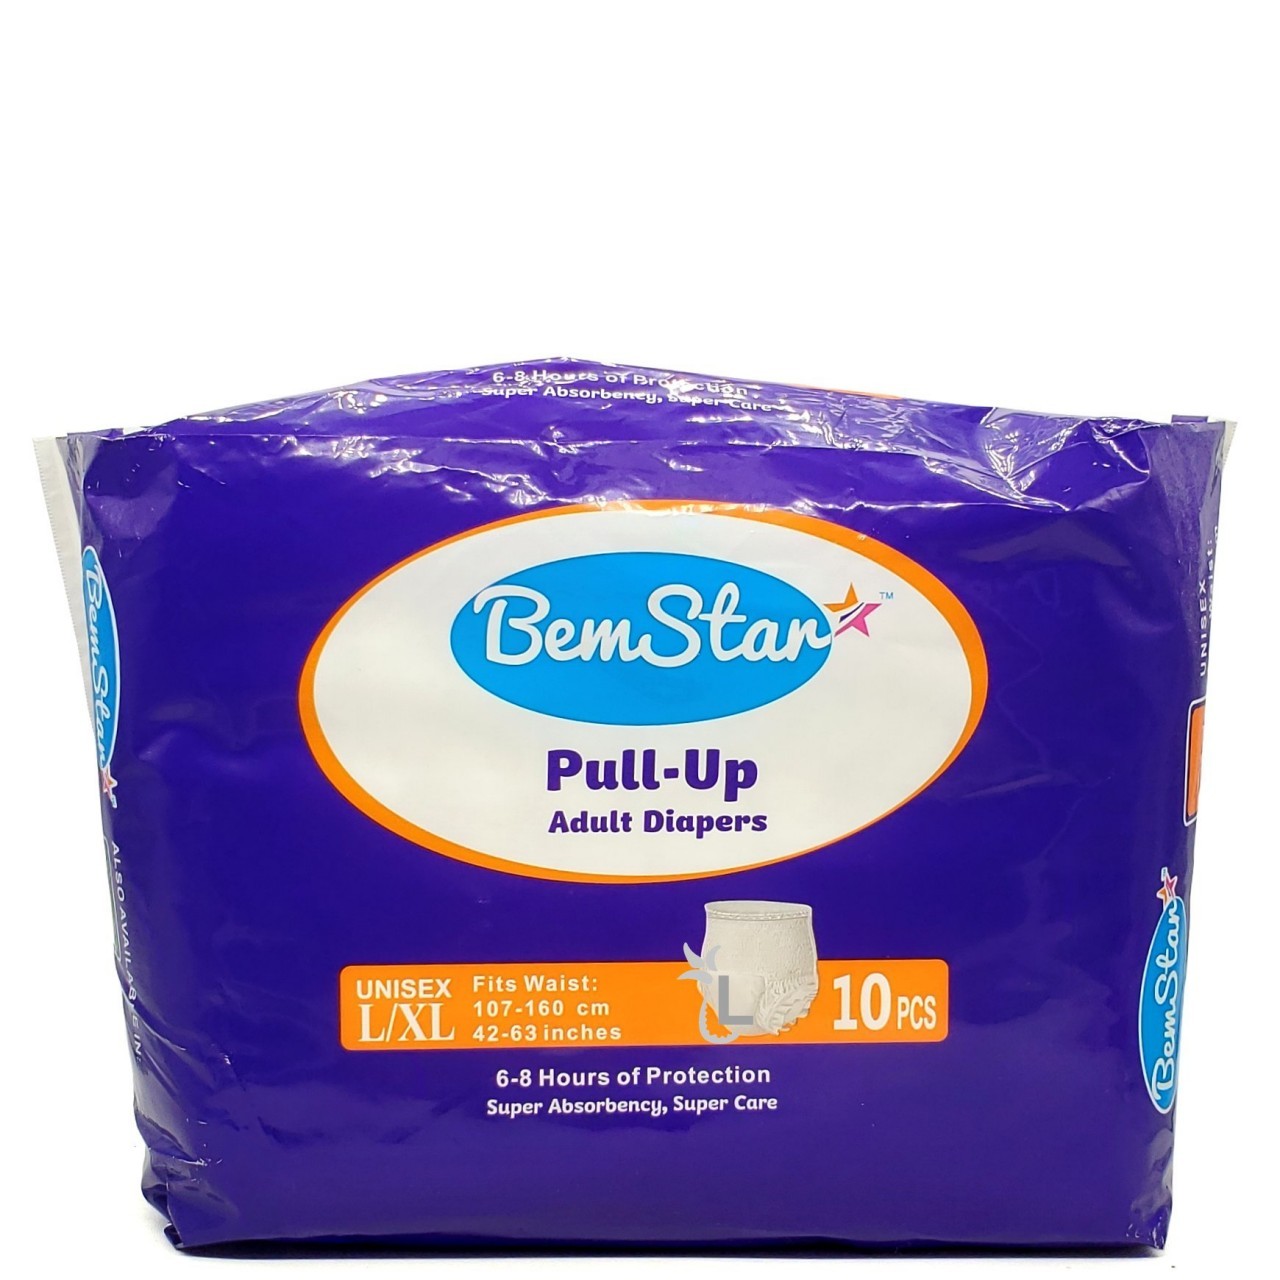 BEMSTAR ADULT PULL-UP DIAPERS (L/XL) 10